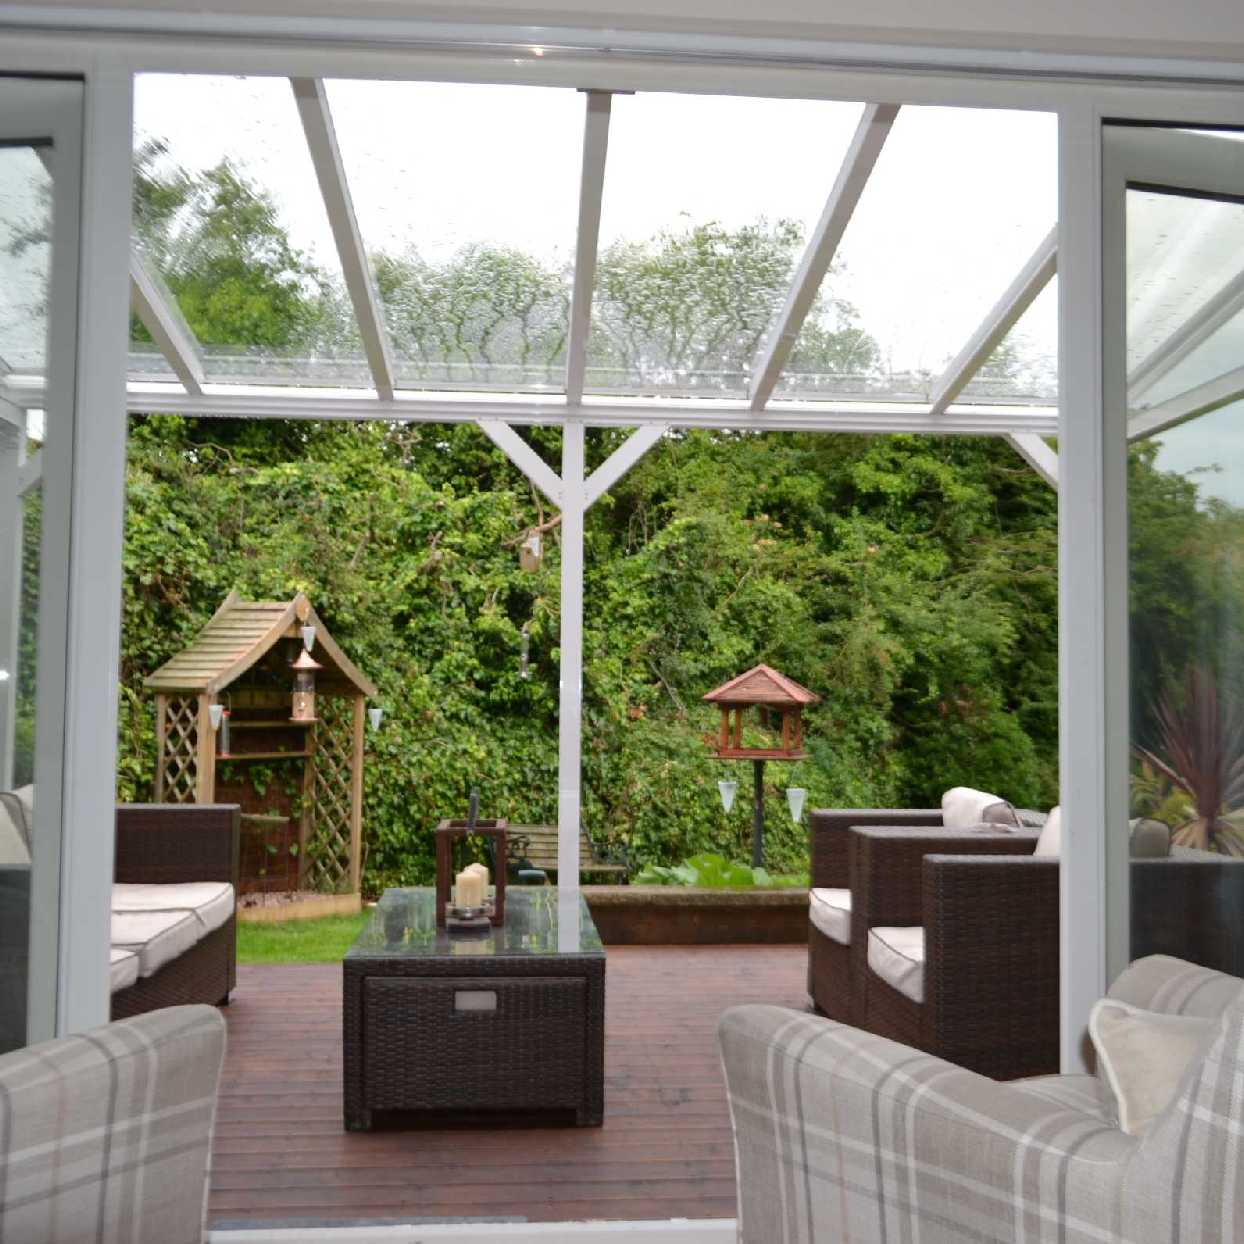 Great selection of Omega Smart Lean-To Canopy, White UNGLAZED for 6mm Glazing - 7.7m (W) x 2.0m (P), (4) Supporting Posts